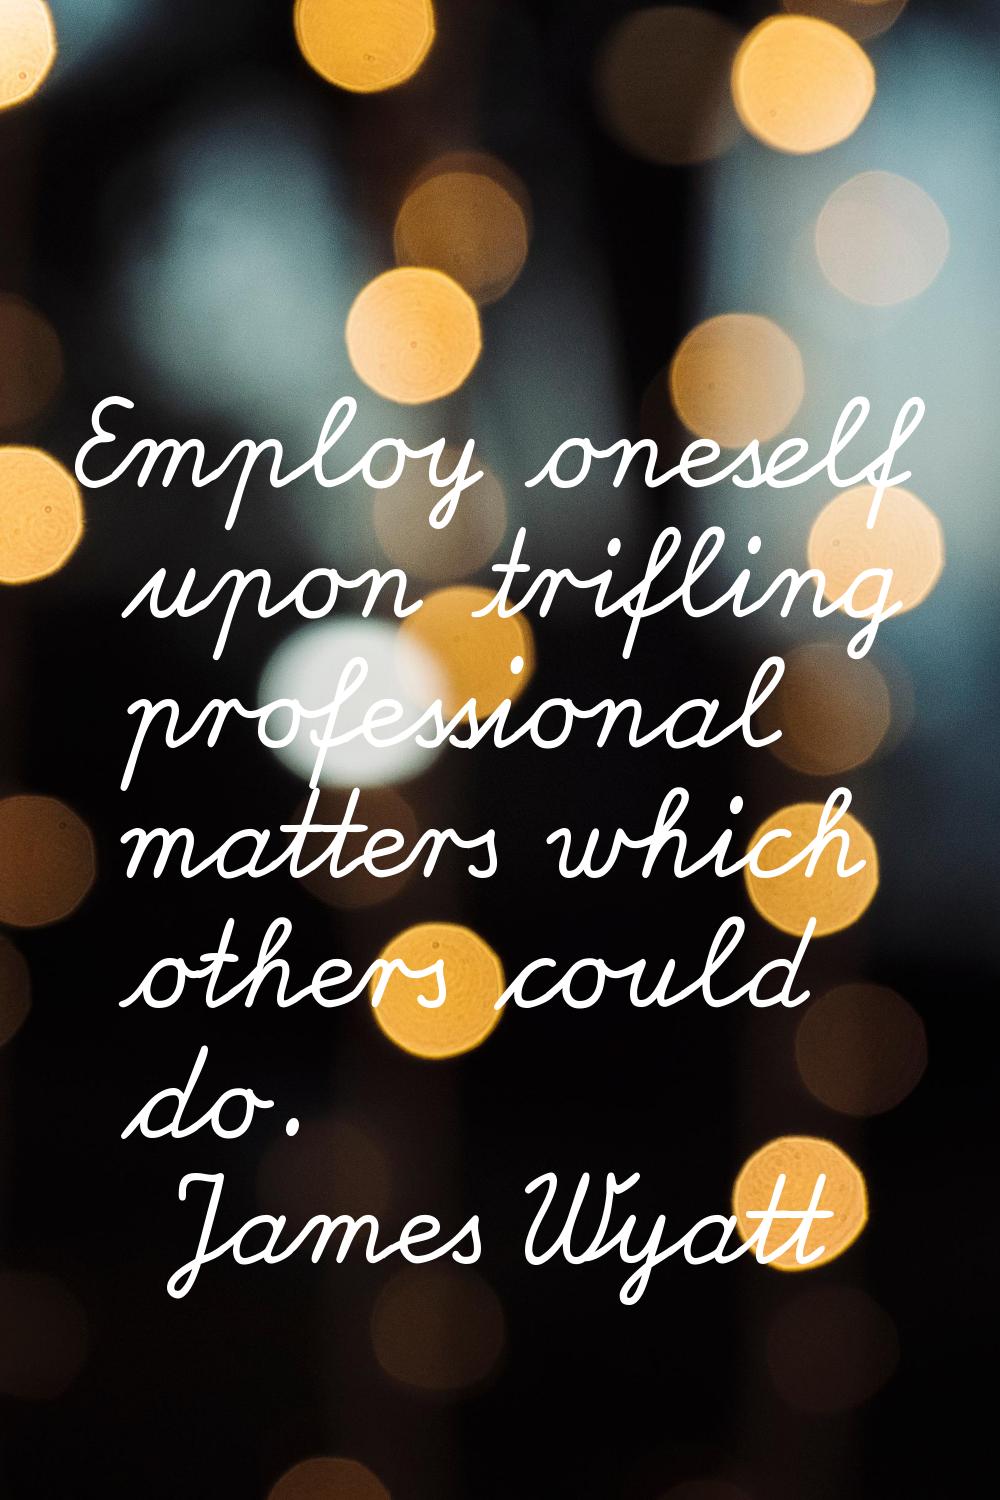 Employ oneself upon trifling professional matters which others could do.